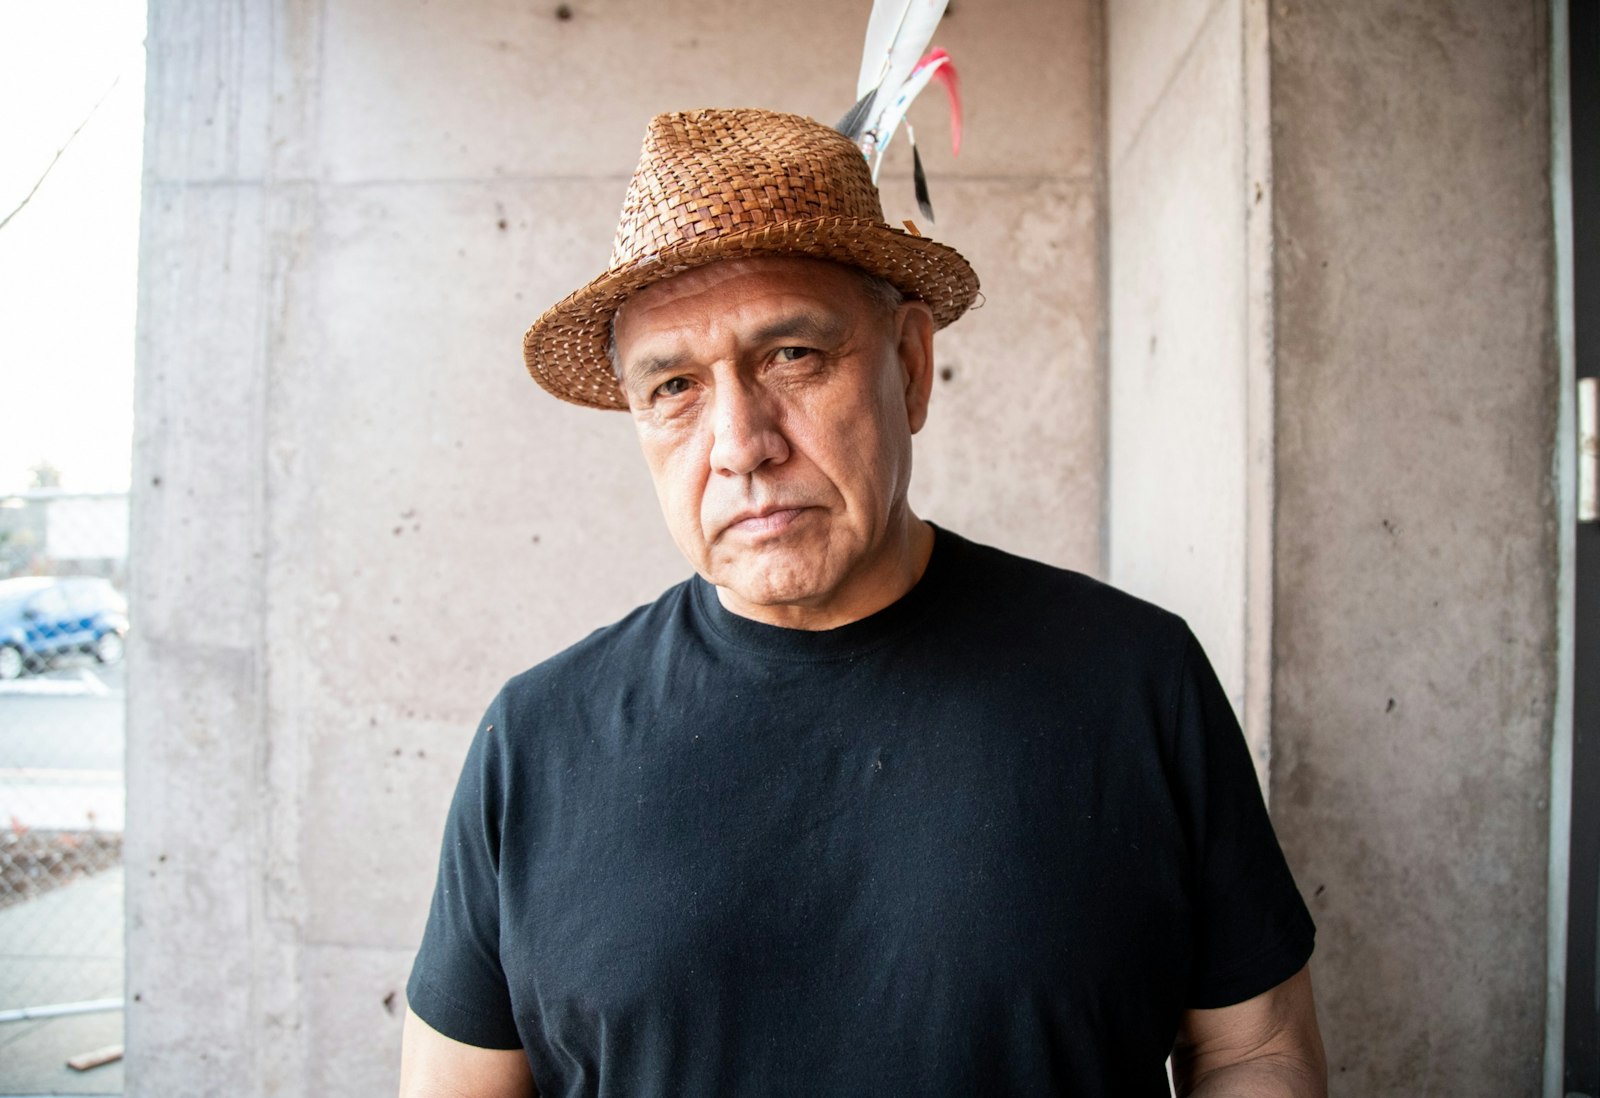 Darrell Hillaire, a Lummi Nation leader and executive director of Children of the Setting Sun Productions, stands in front of a concrete wall.